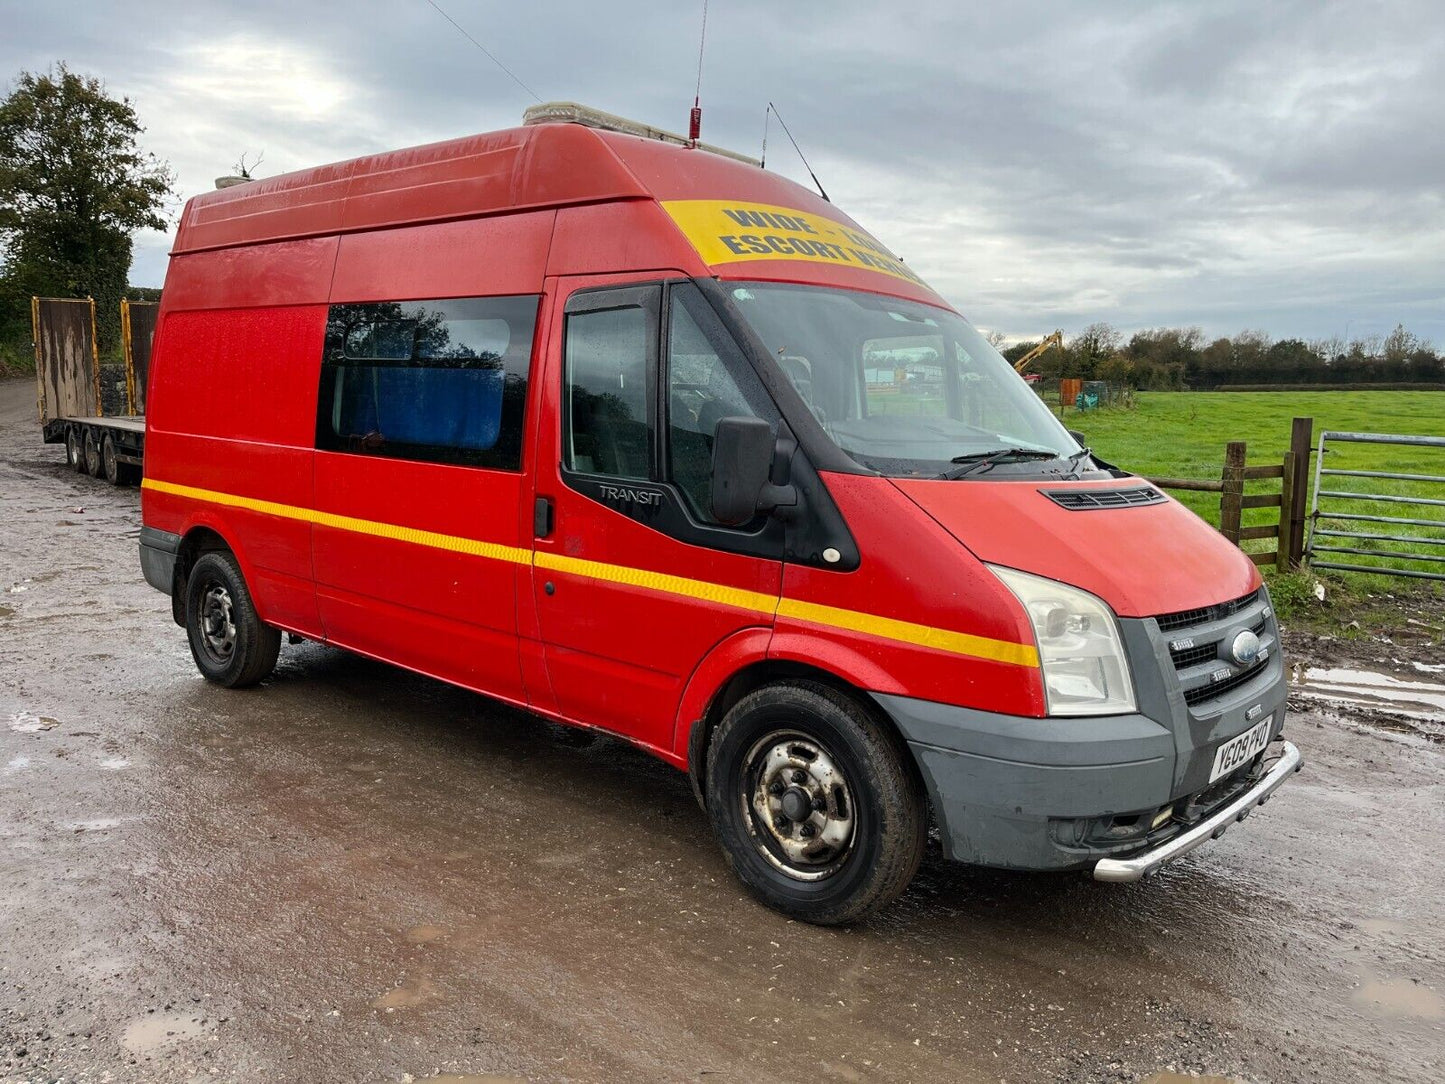 Bid on 2009 FORD TRANSIT WELFARE VEHICLE- Buy &amp; Sell on Auction with EAMA Group